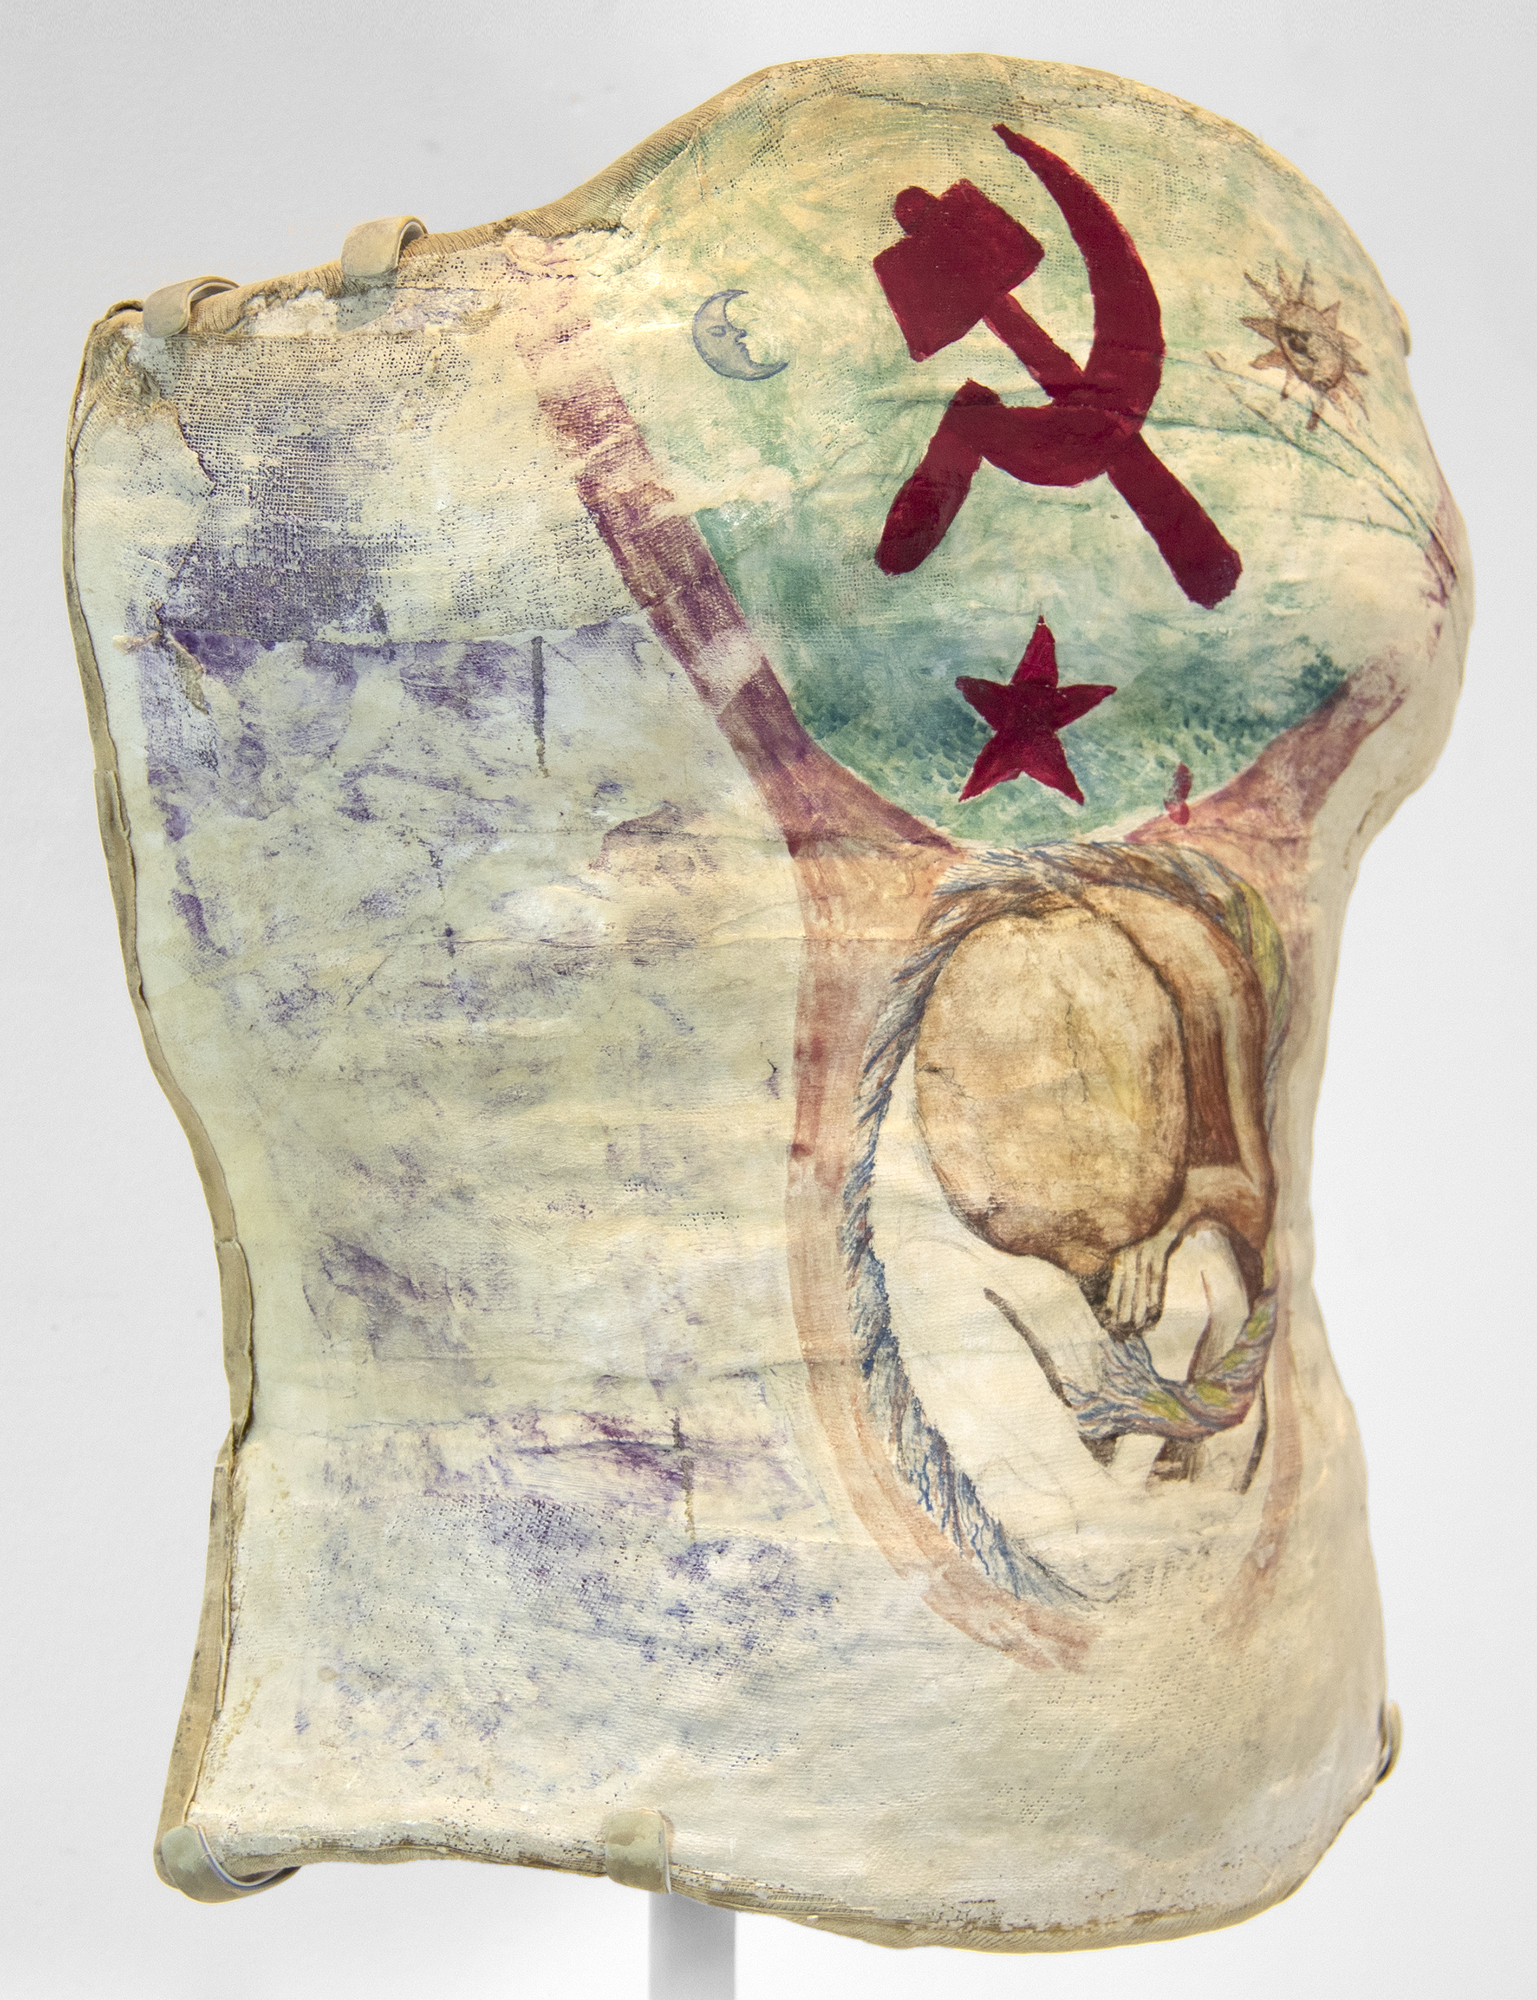 FRIDA KAHLO - Hammer and Sickle (and unborn baby) - dry plaster and mixed media - 16 1/4 x 13 x 6 in.